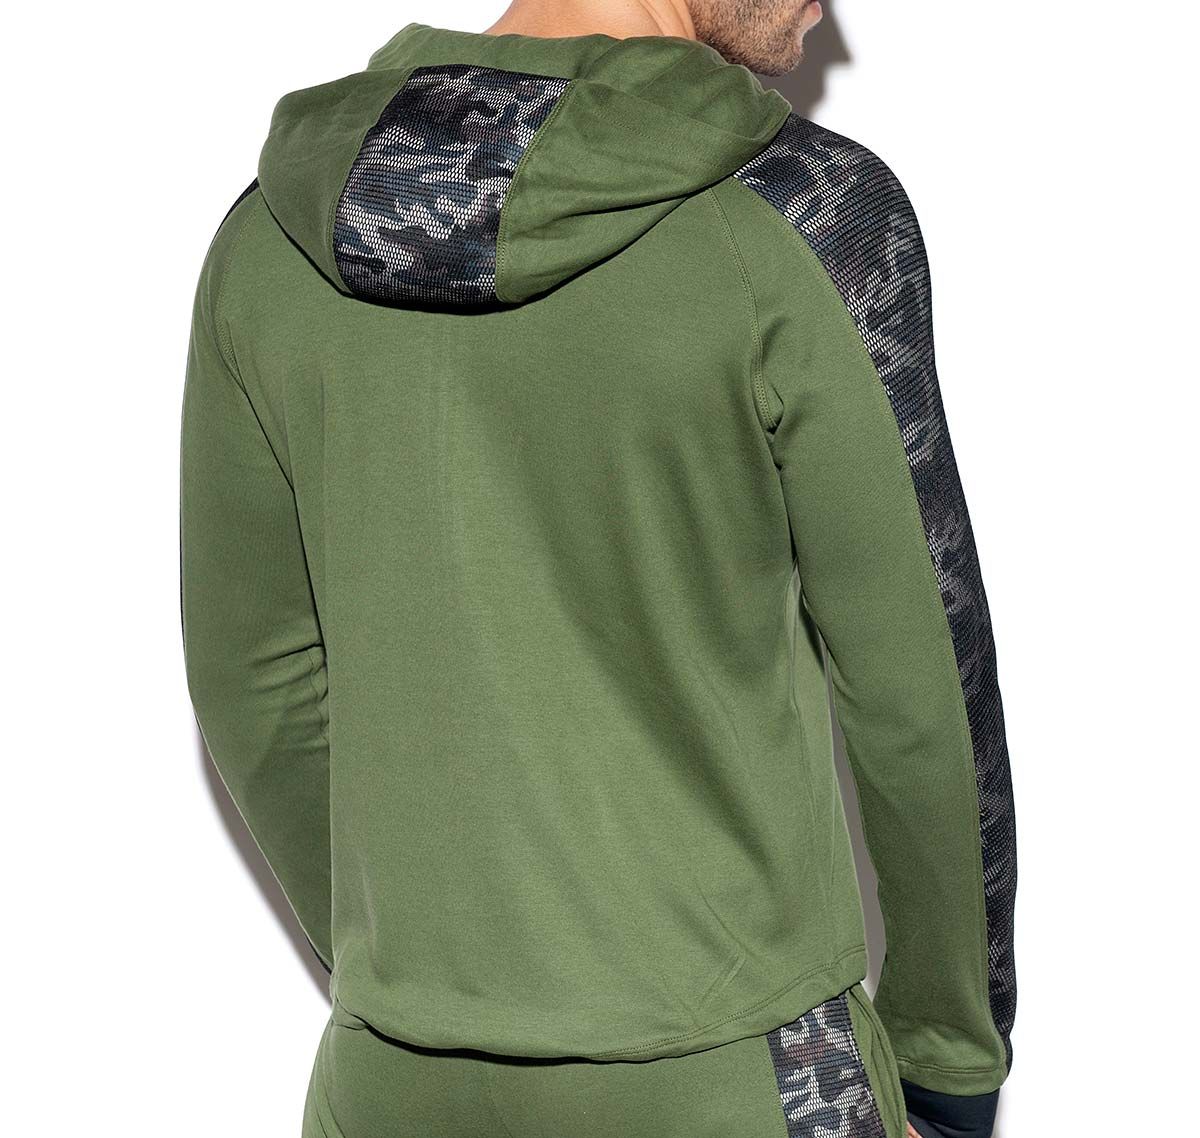 ES Collection Jacket ARMY PADDED SPORT JACKET SP220, green